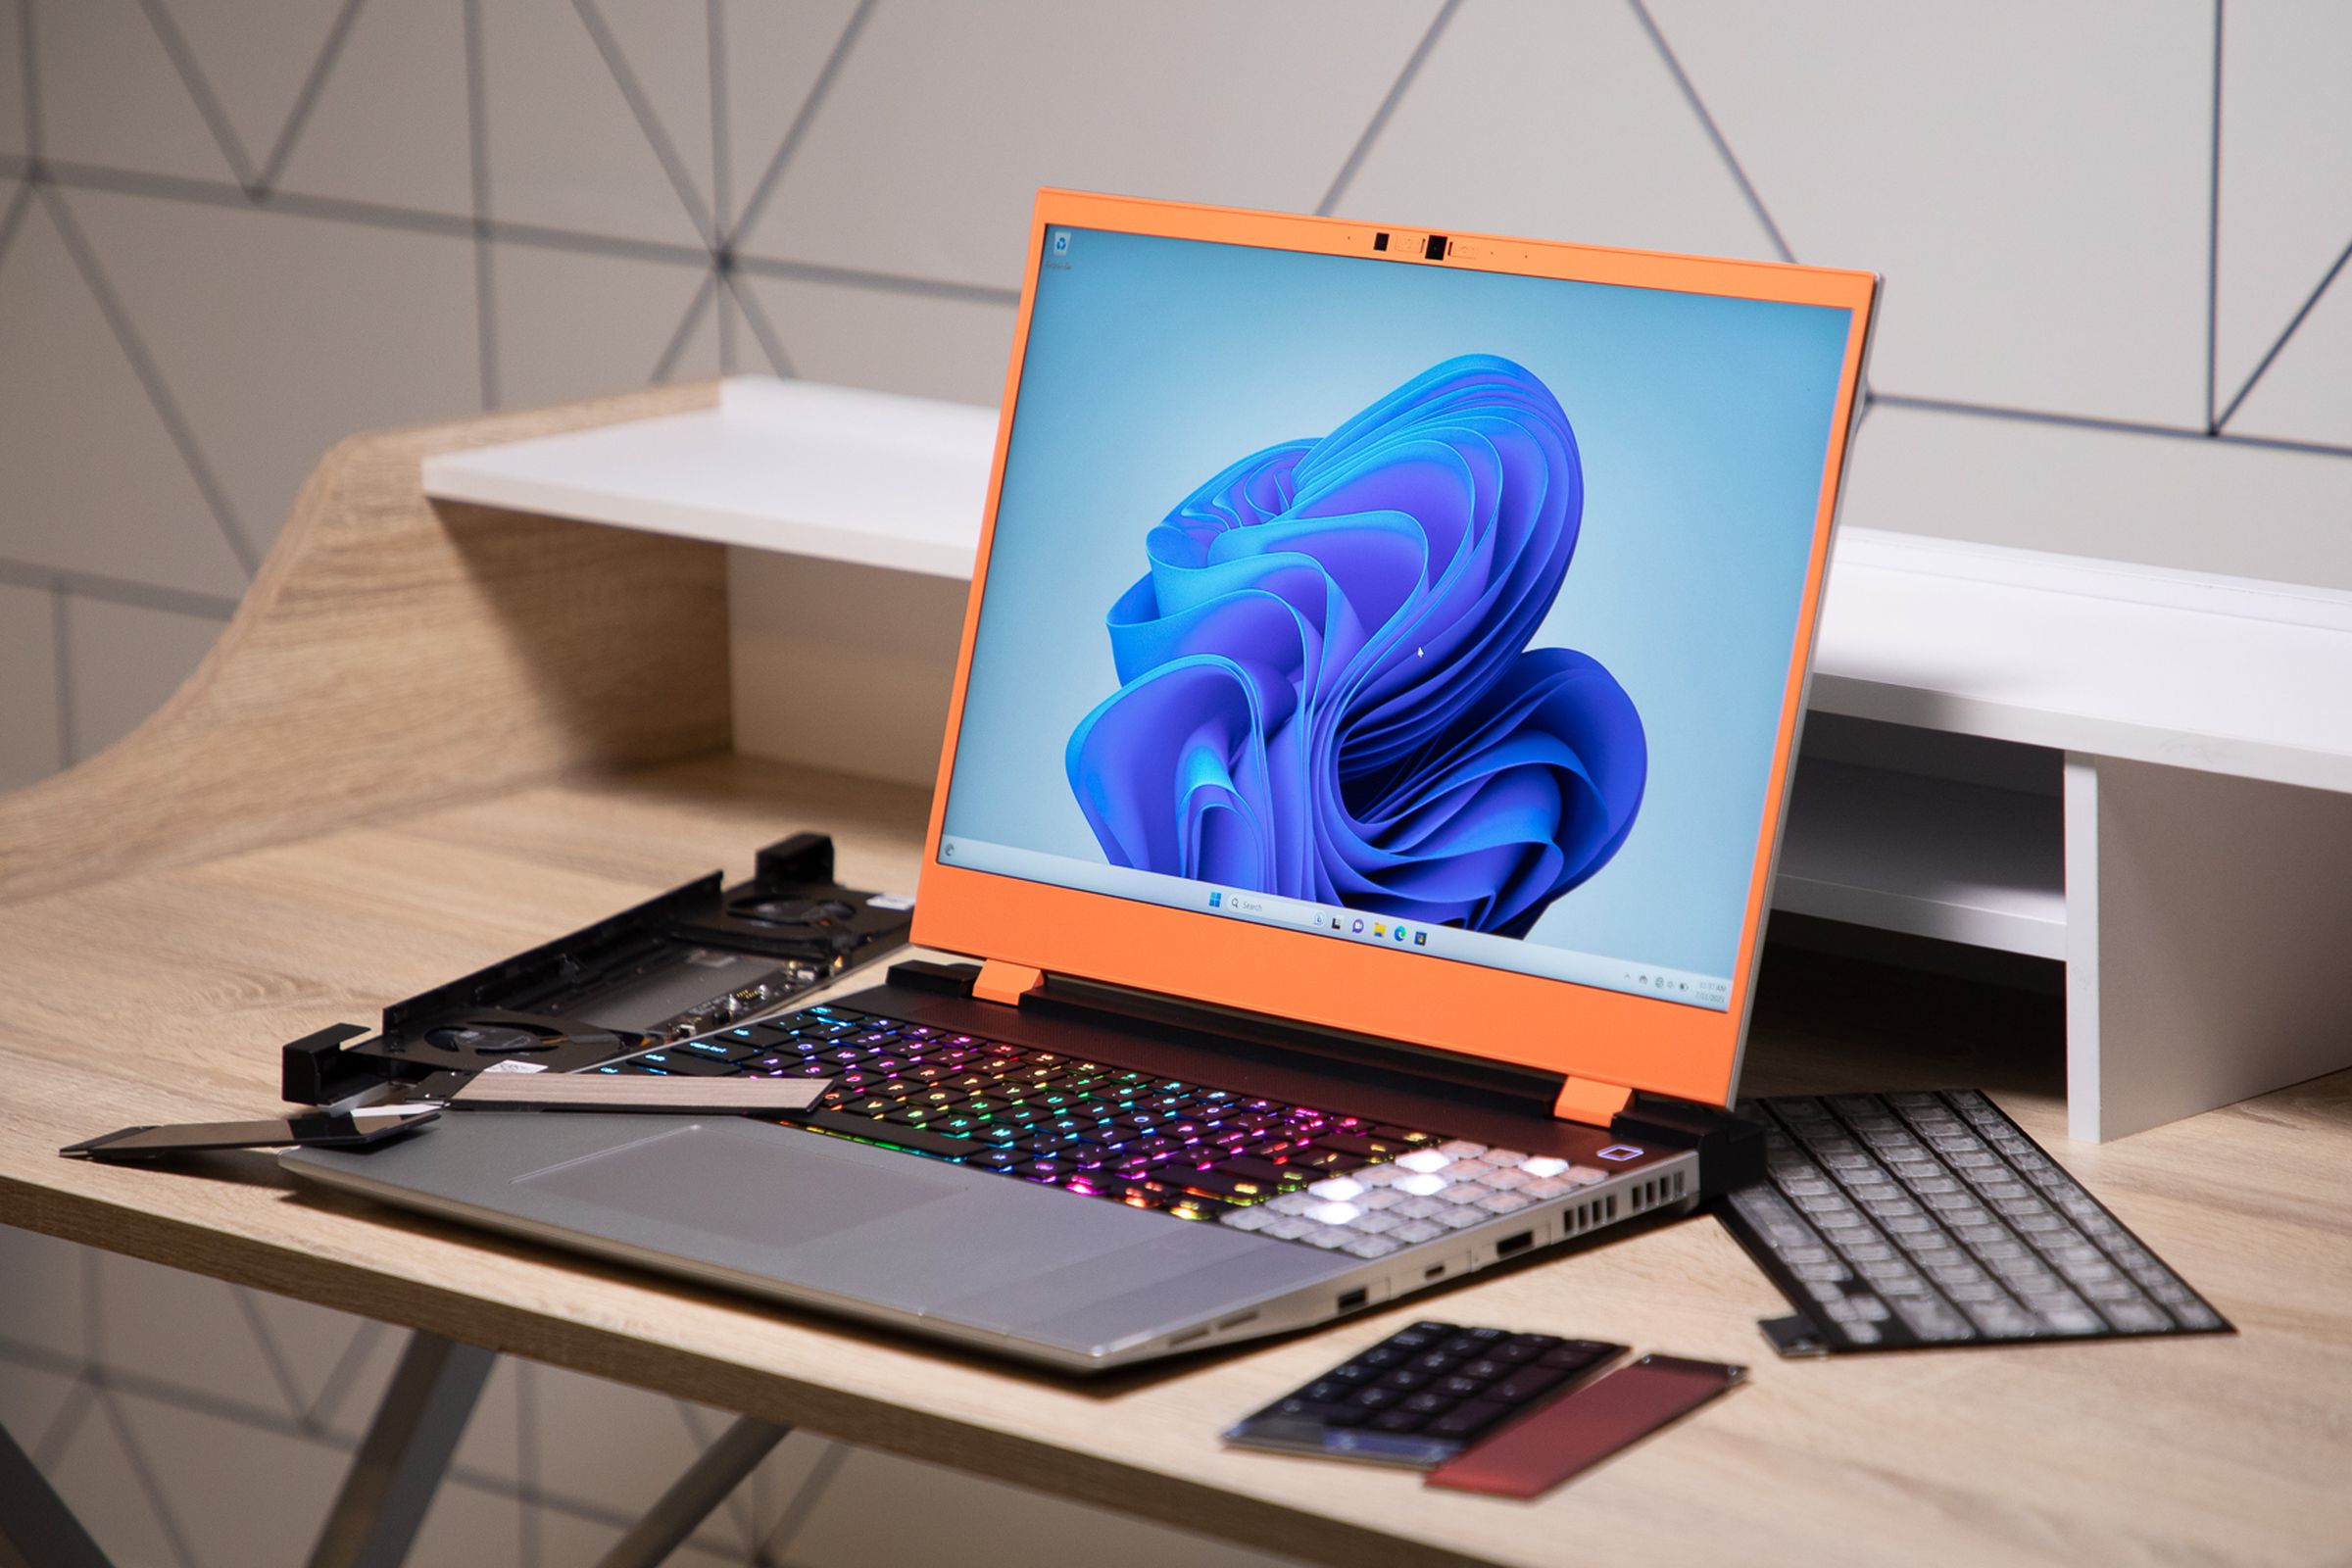 A laptop with an orange bezel and RGB keyboard and LED numpad and more bumpers surrounding it.